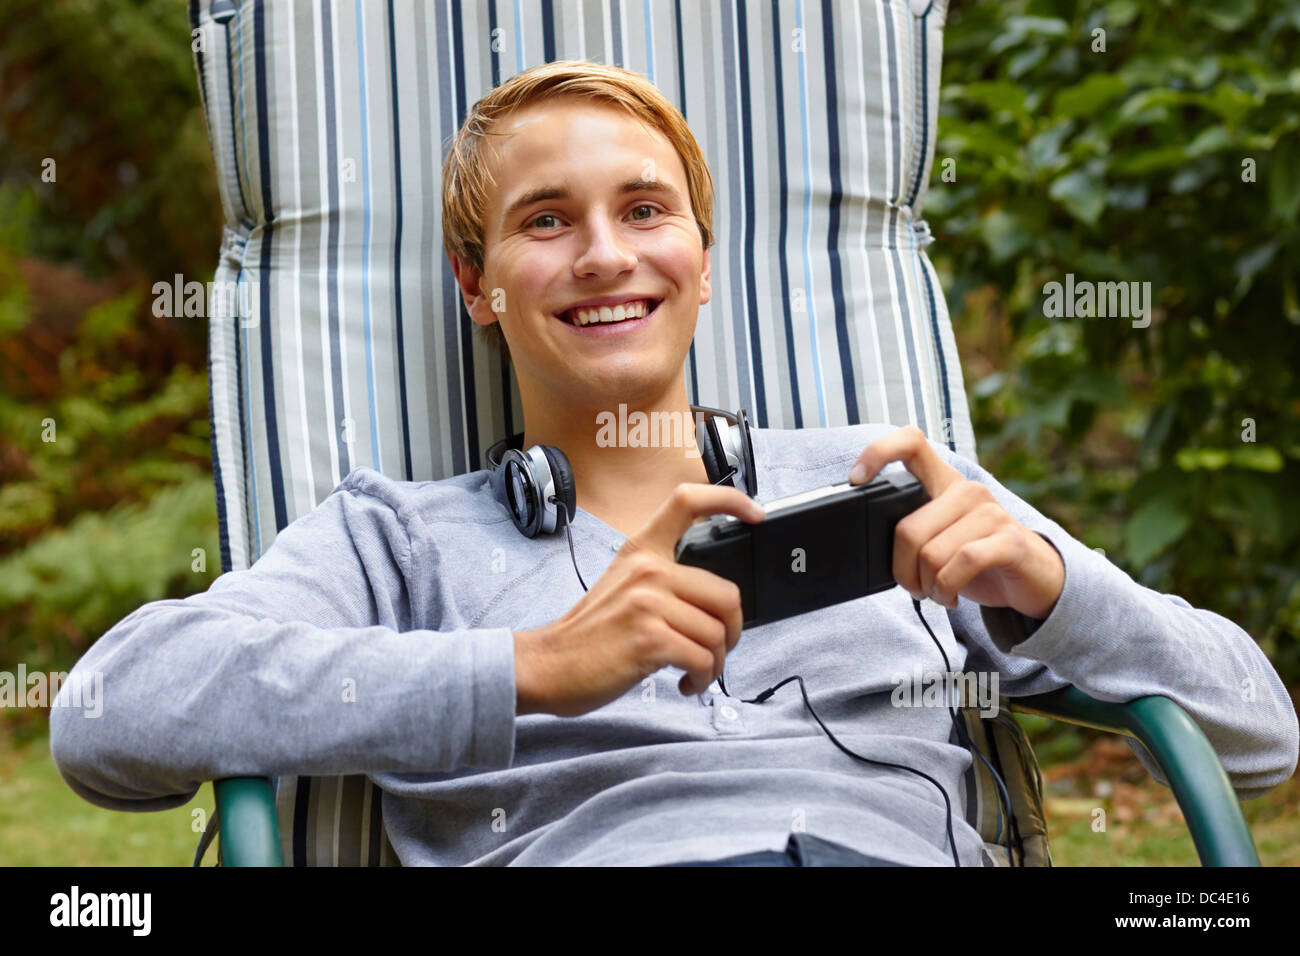 Young male relaxing in lounge outdoors with a game console and headphones. Stock Photo